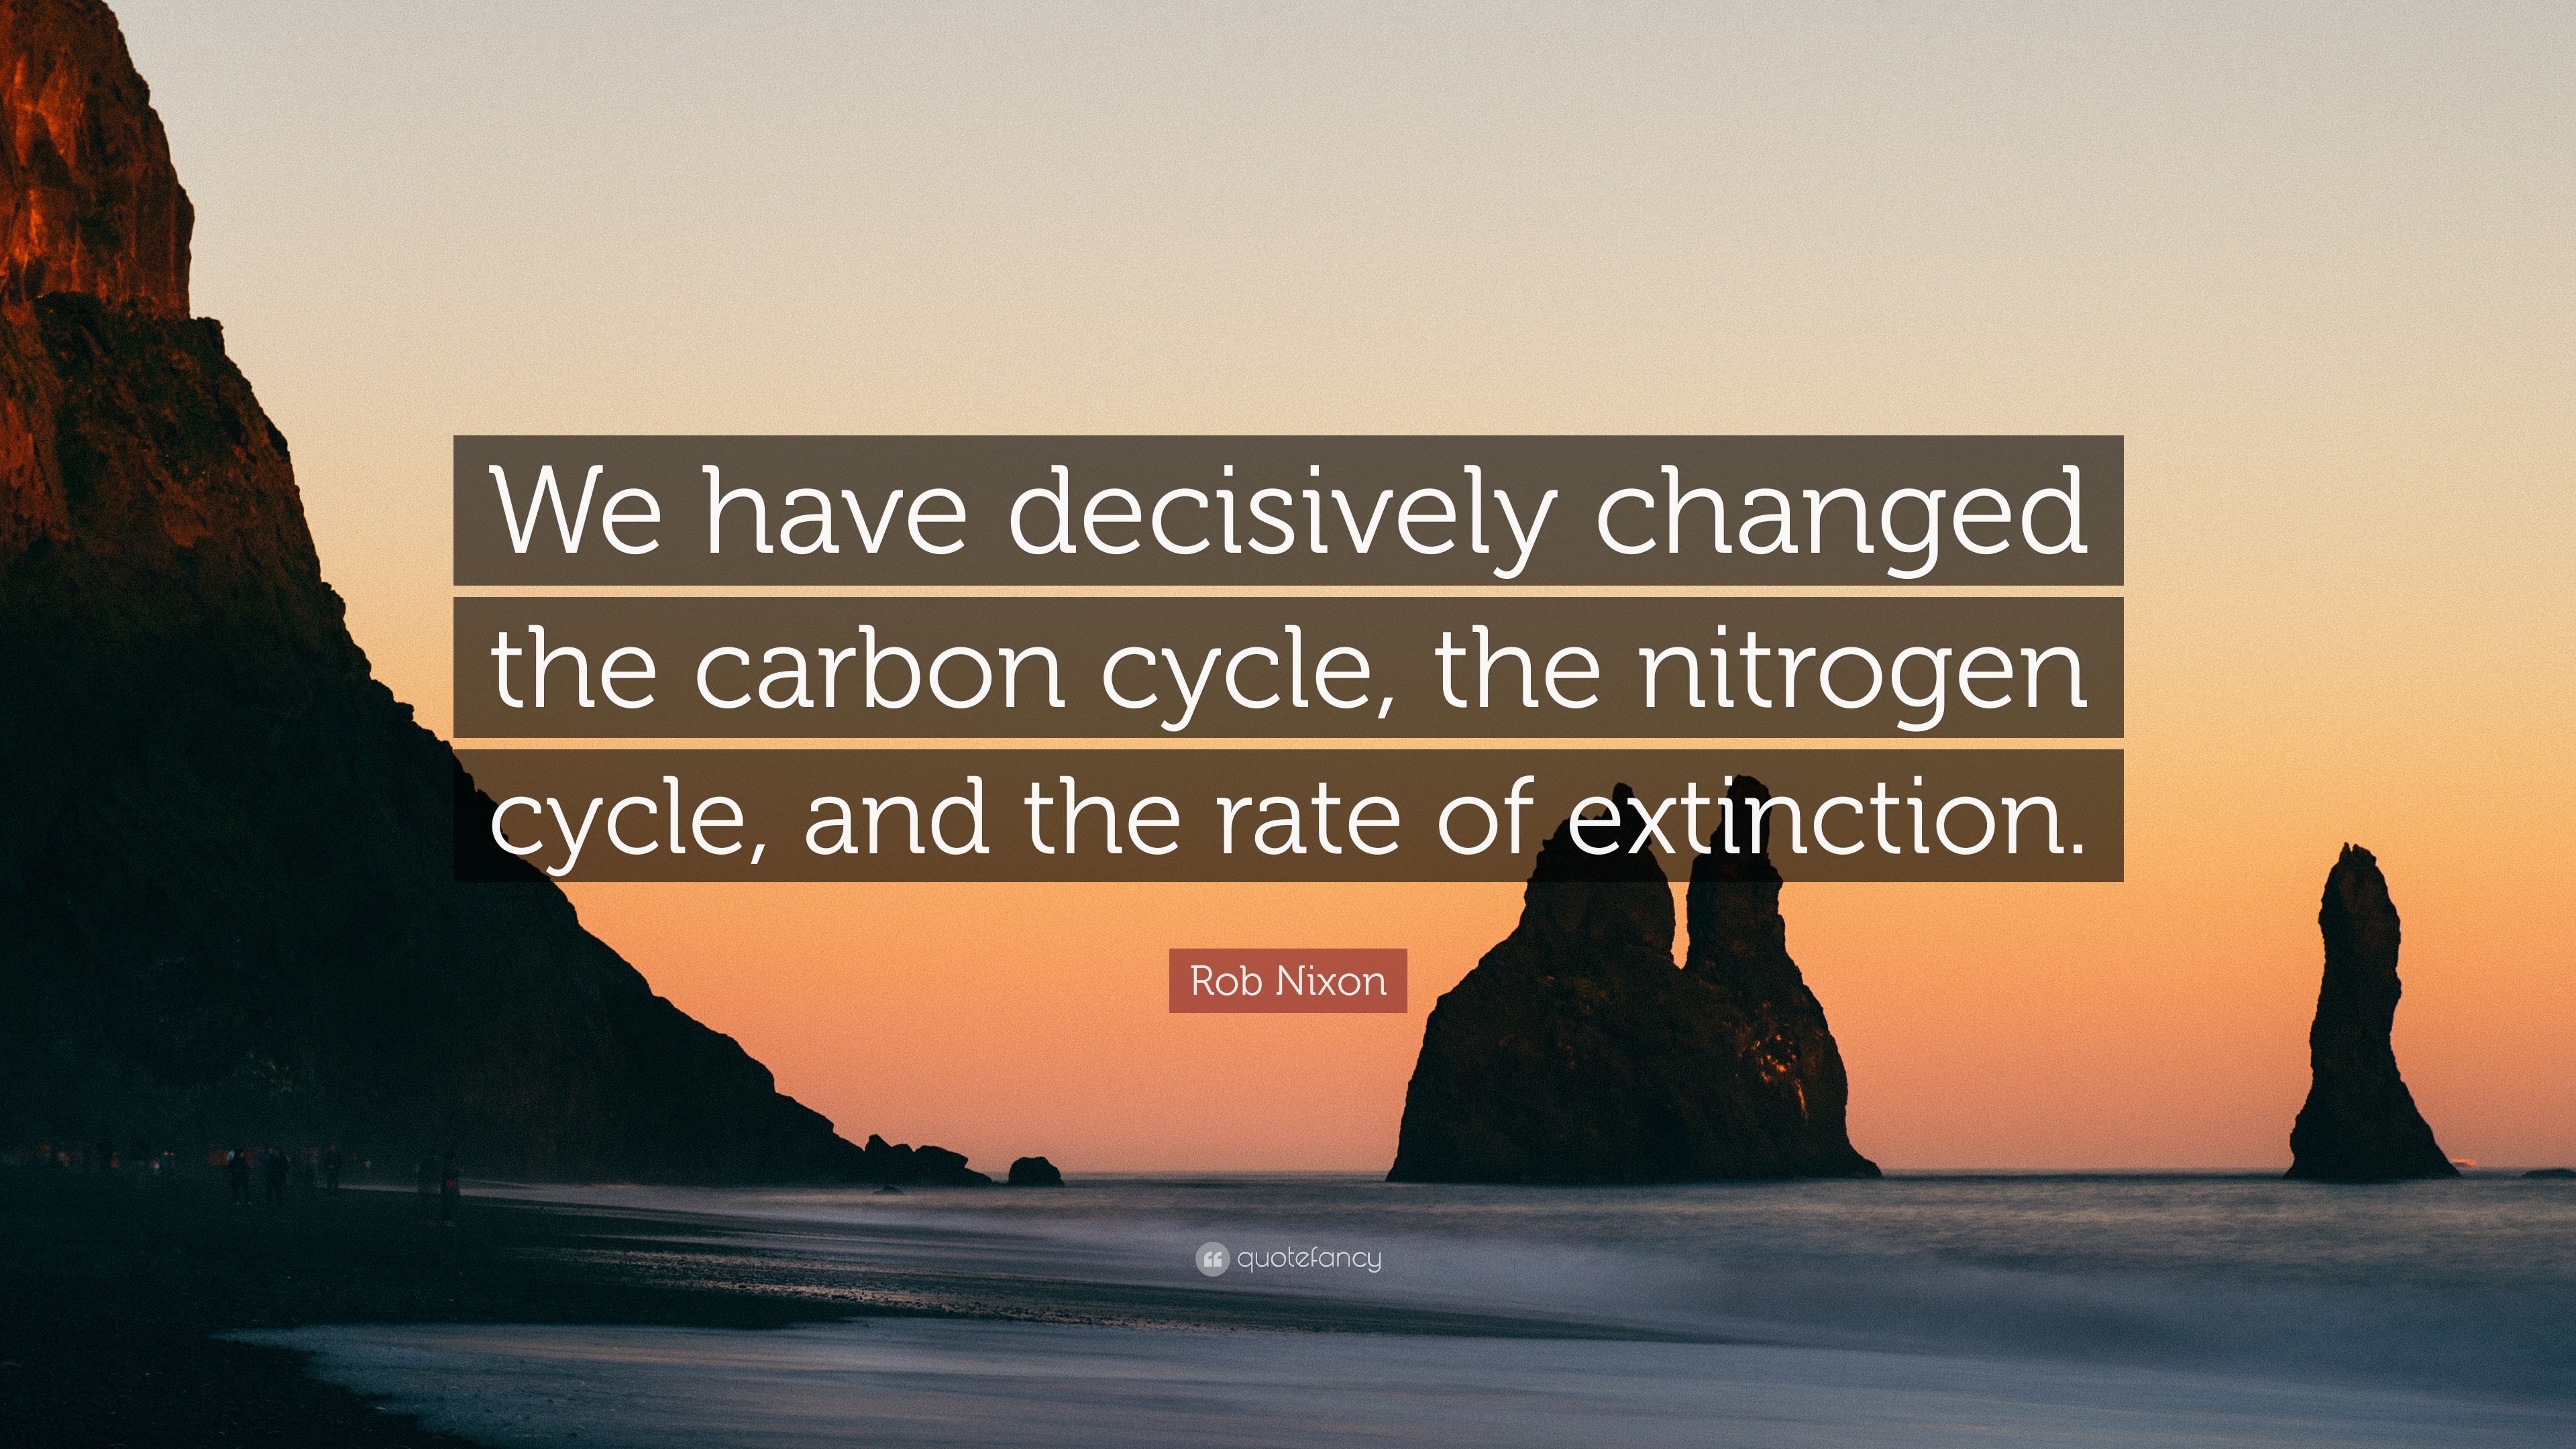 Rob Nixon Quote: “We have decisively changed the carbon cycle